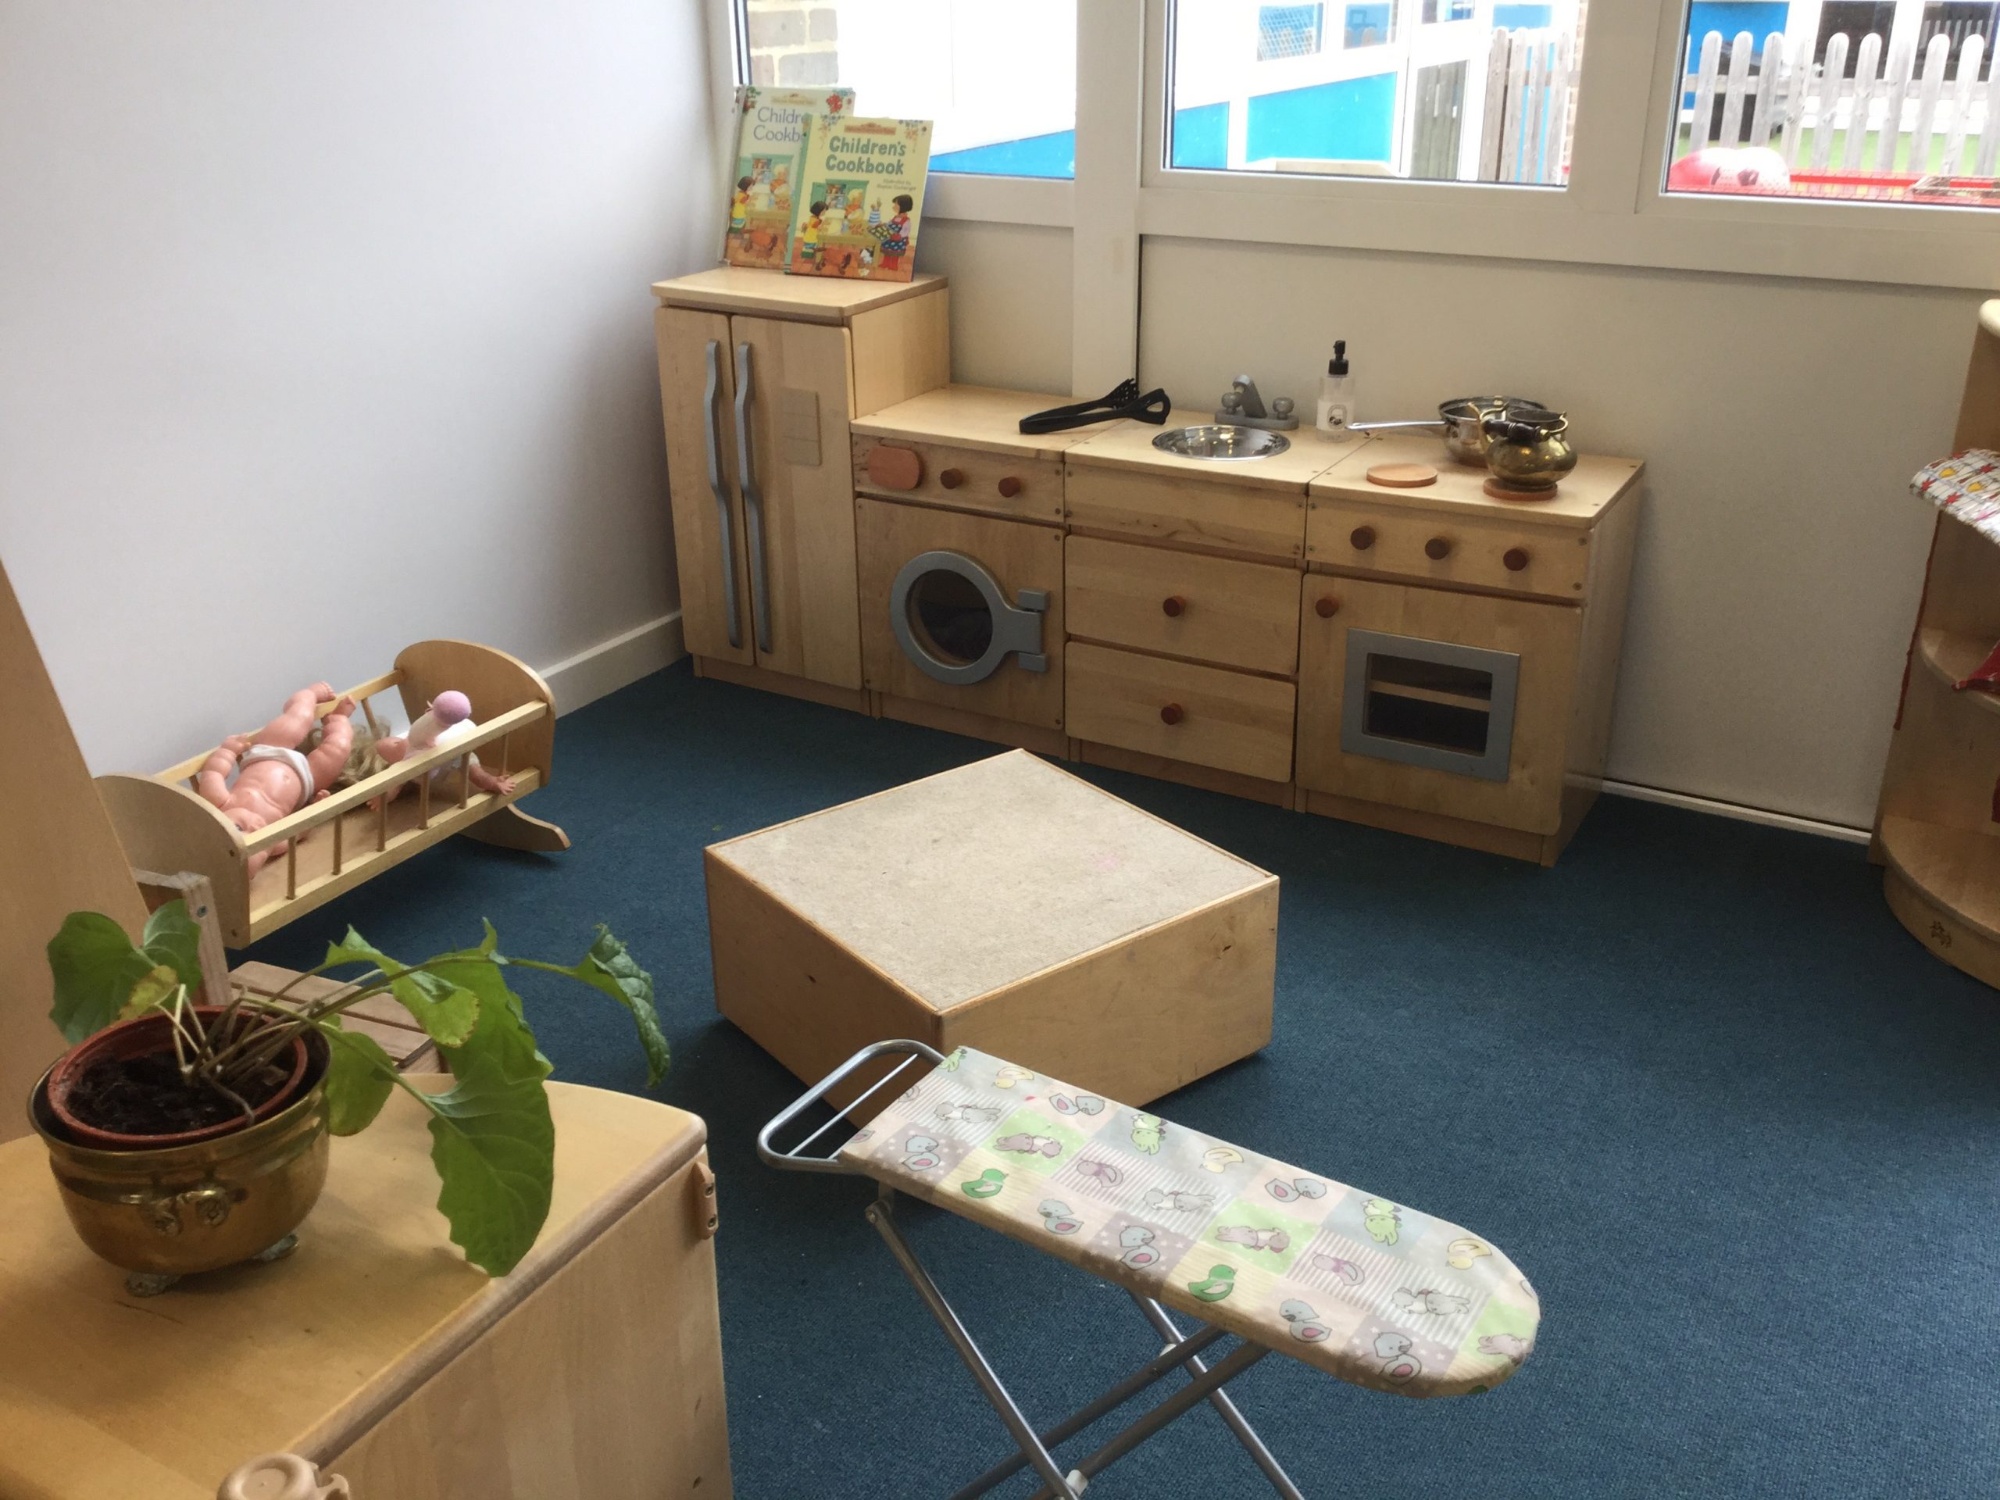 Nursery role play area set up for 'home' role play, with wooden kitchen units, and ironing board and rocking crib with dolls